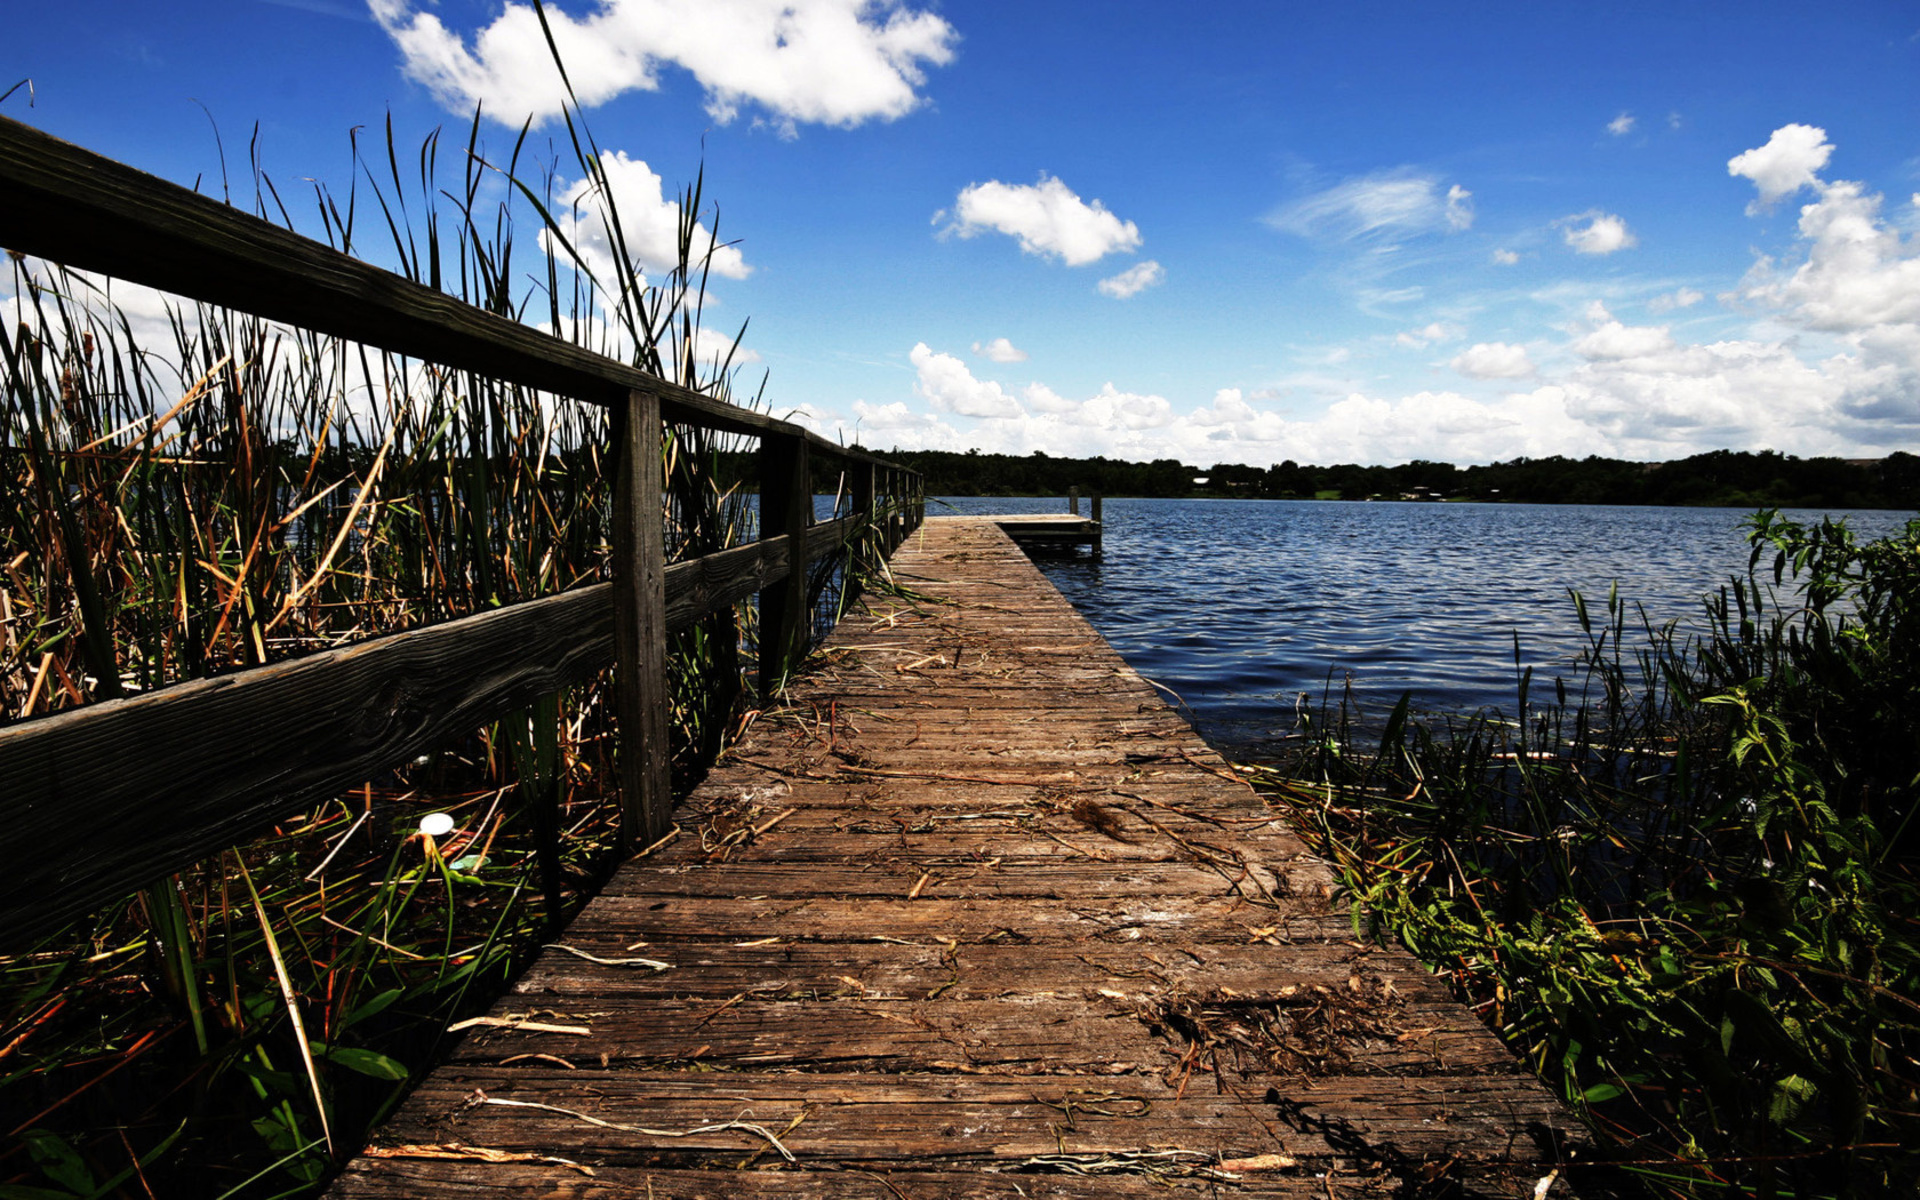 nature, Lakes, Reeds, Grass, Wood, Architecture, Pier, Dock, Fence, Rail, Water, Sky, Clouds Wallpaper